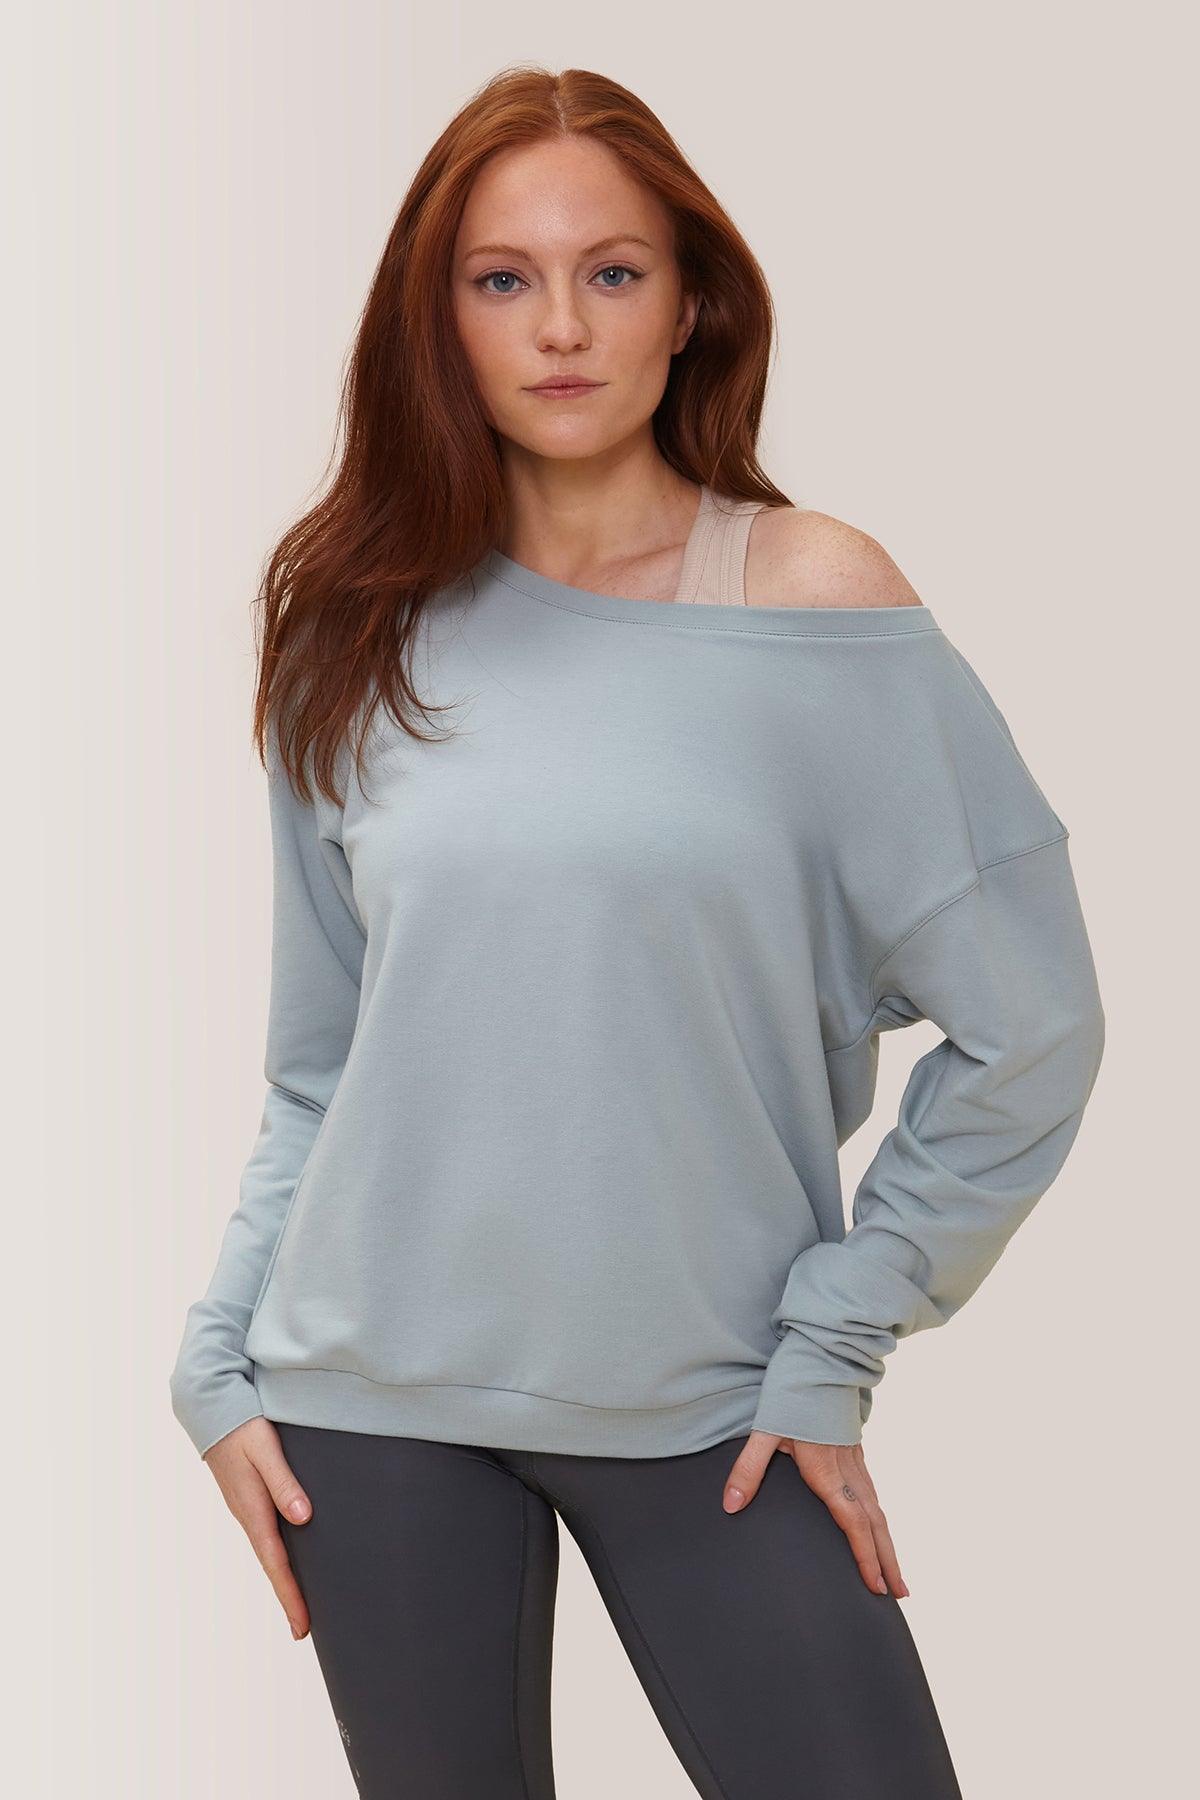 Femme qui porte le chandail Flashdance de Rose Boreal./ Women wearing the Flashdance pullover from Rose Boreal. - Lychen